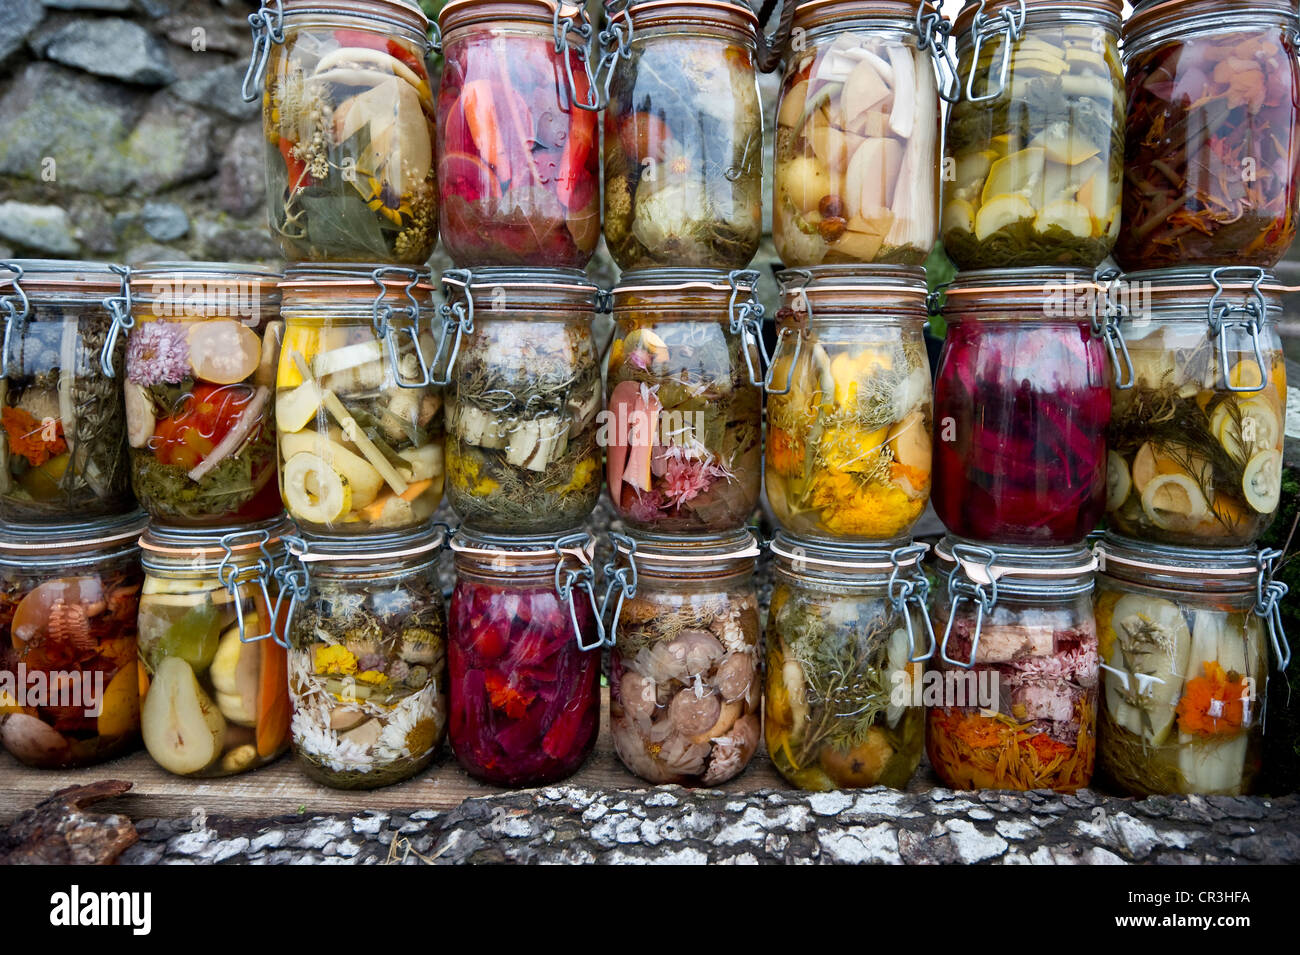 Autumn still life with jars of preserved food Stock Photo